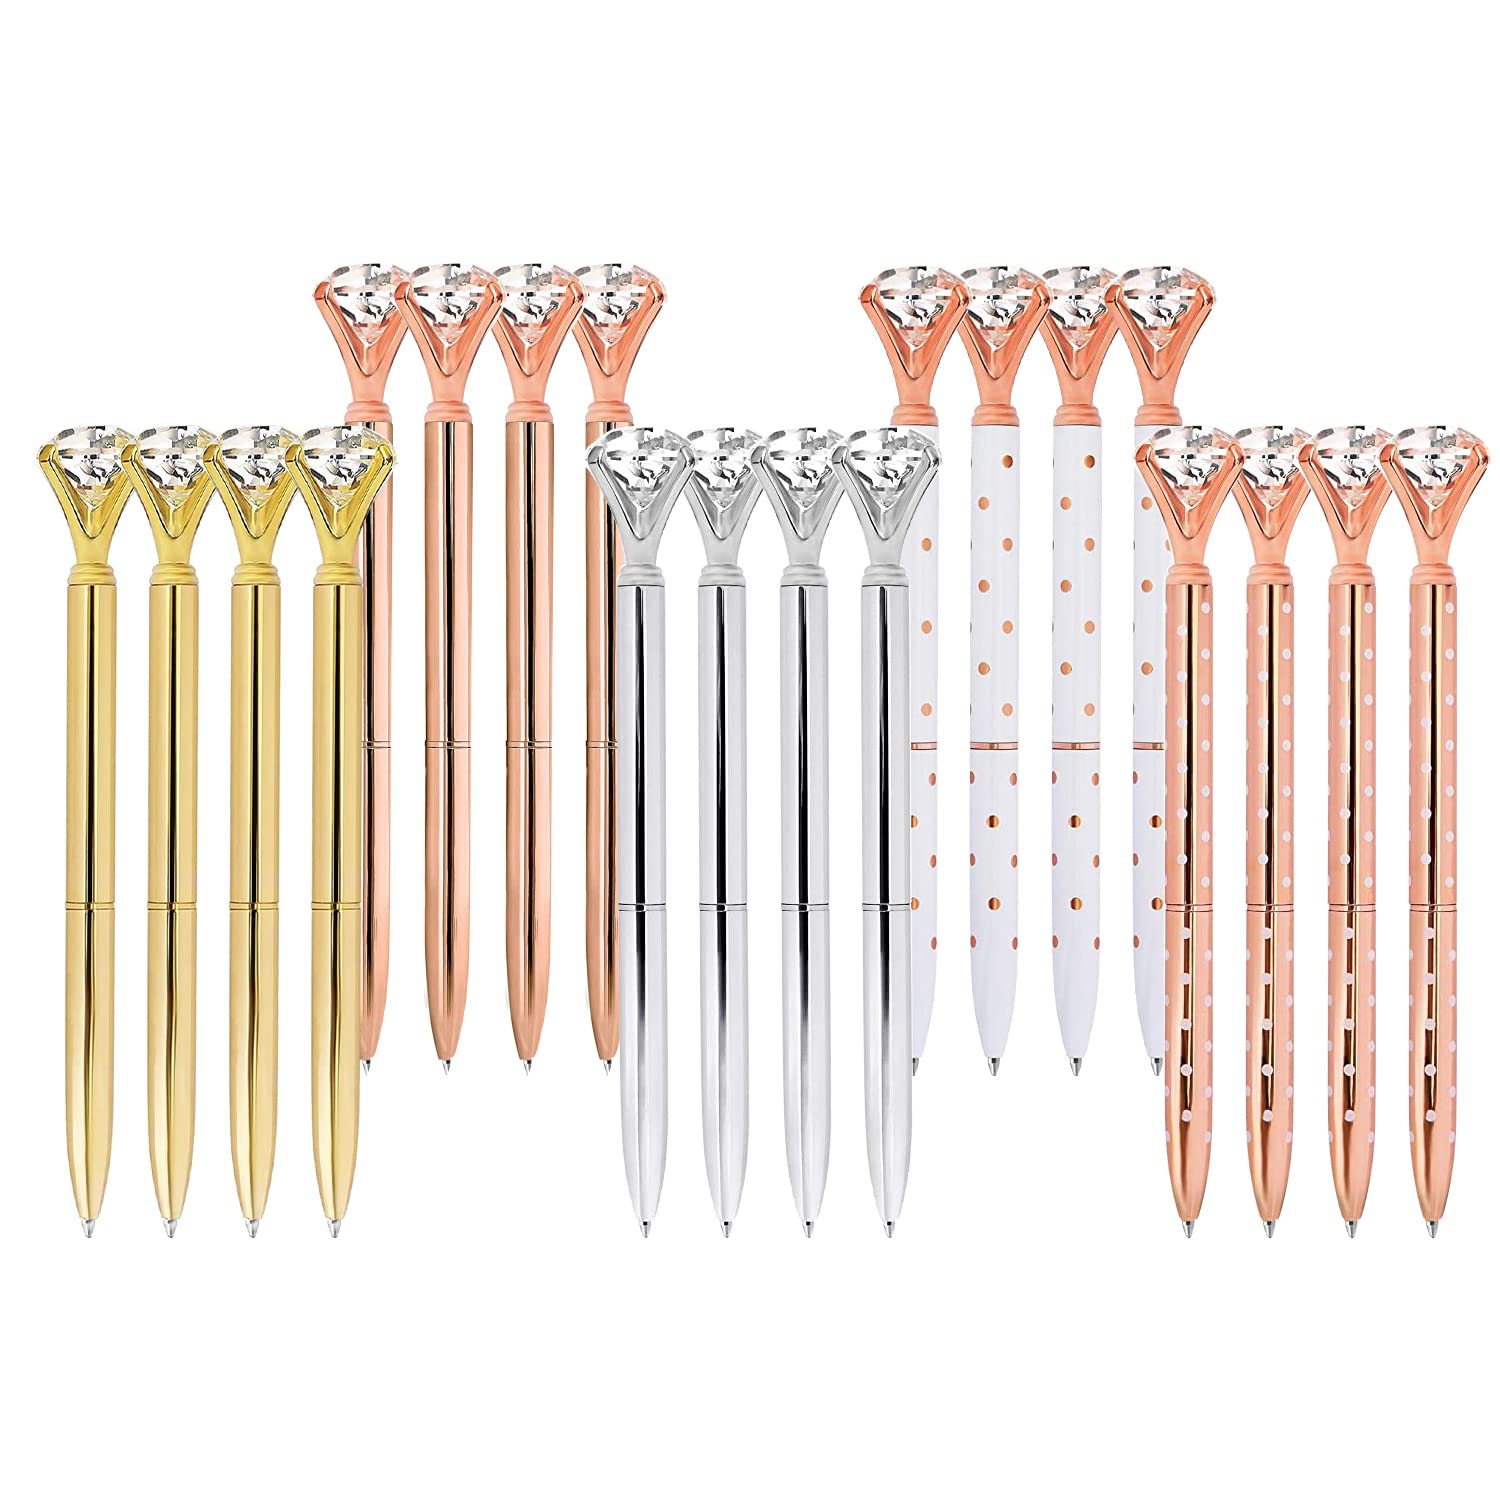 ETCBUYS Multi-Color Diamond Ballpoint Pen for Stylish Fancy Office Supplies- 20 Pack